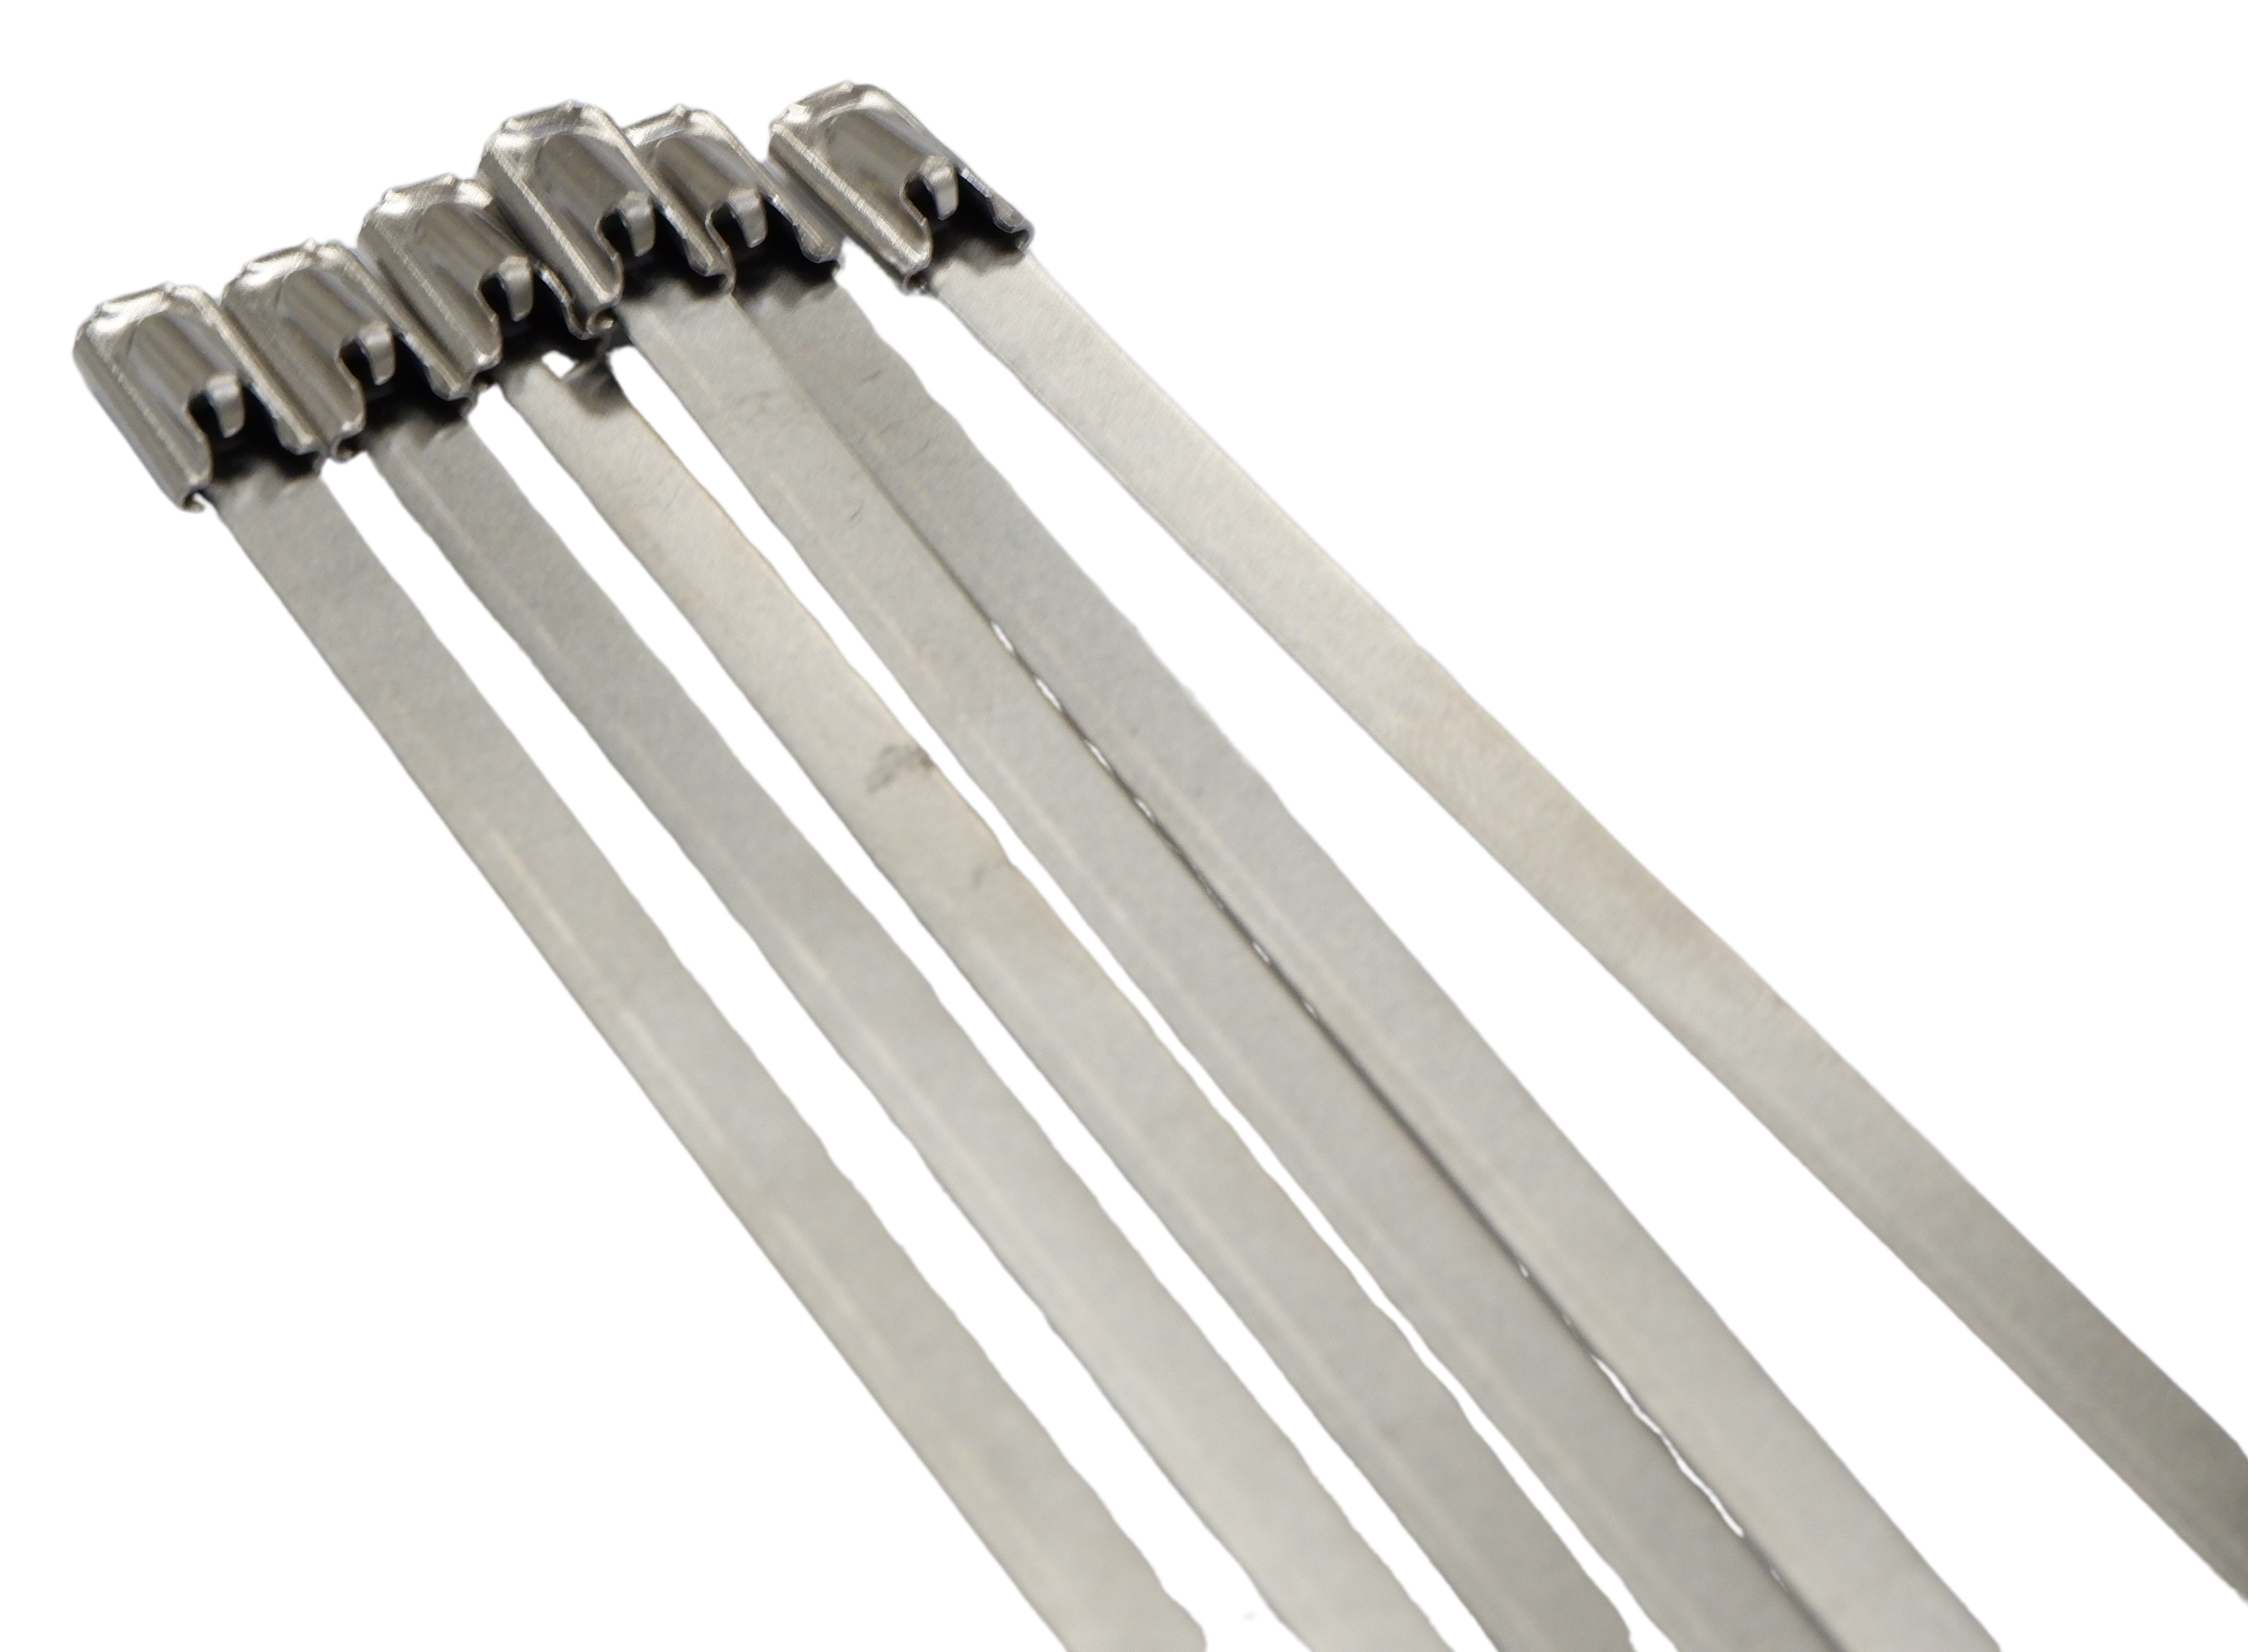 316 Stainless Steel Cable Ties - Ball Lock Design, 150 Lb Tensile Strength